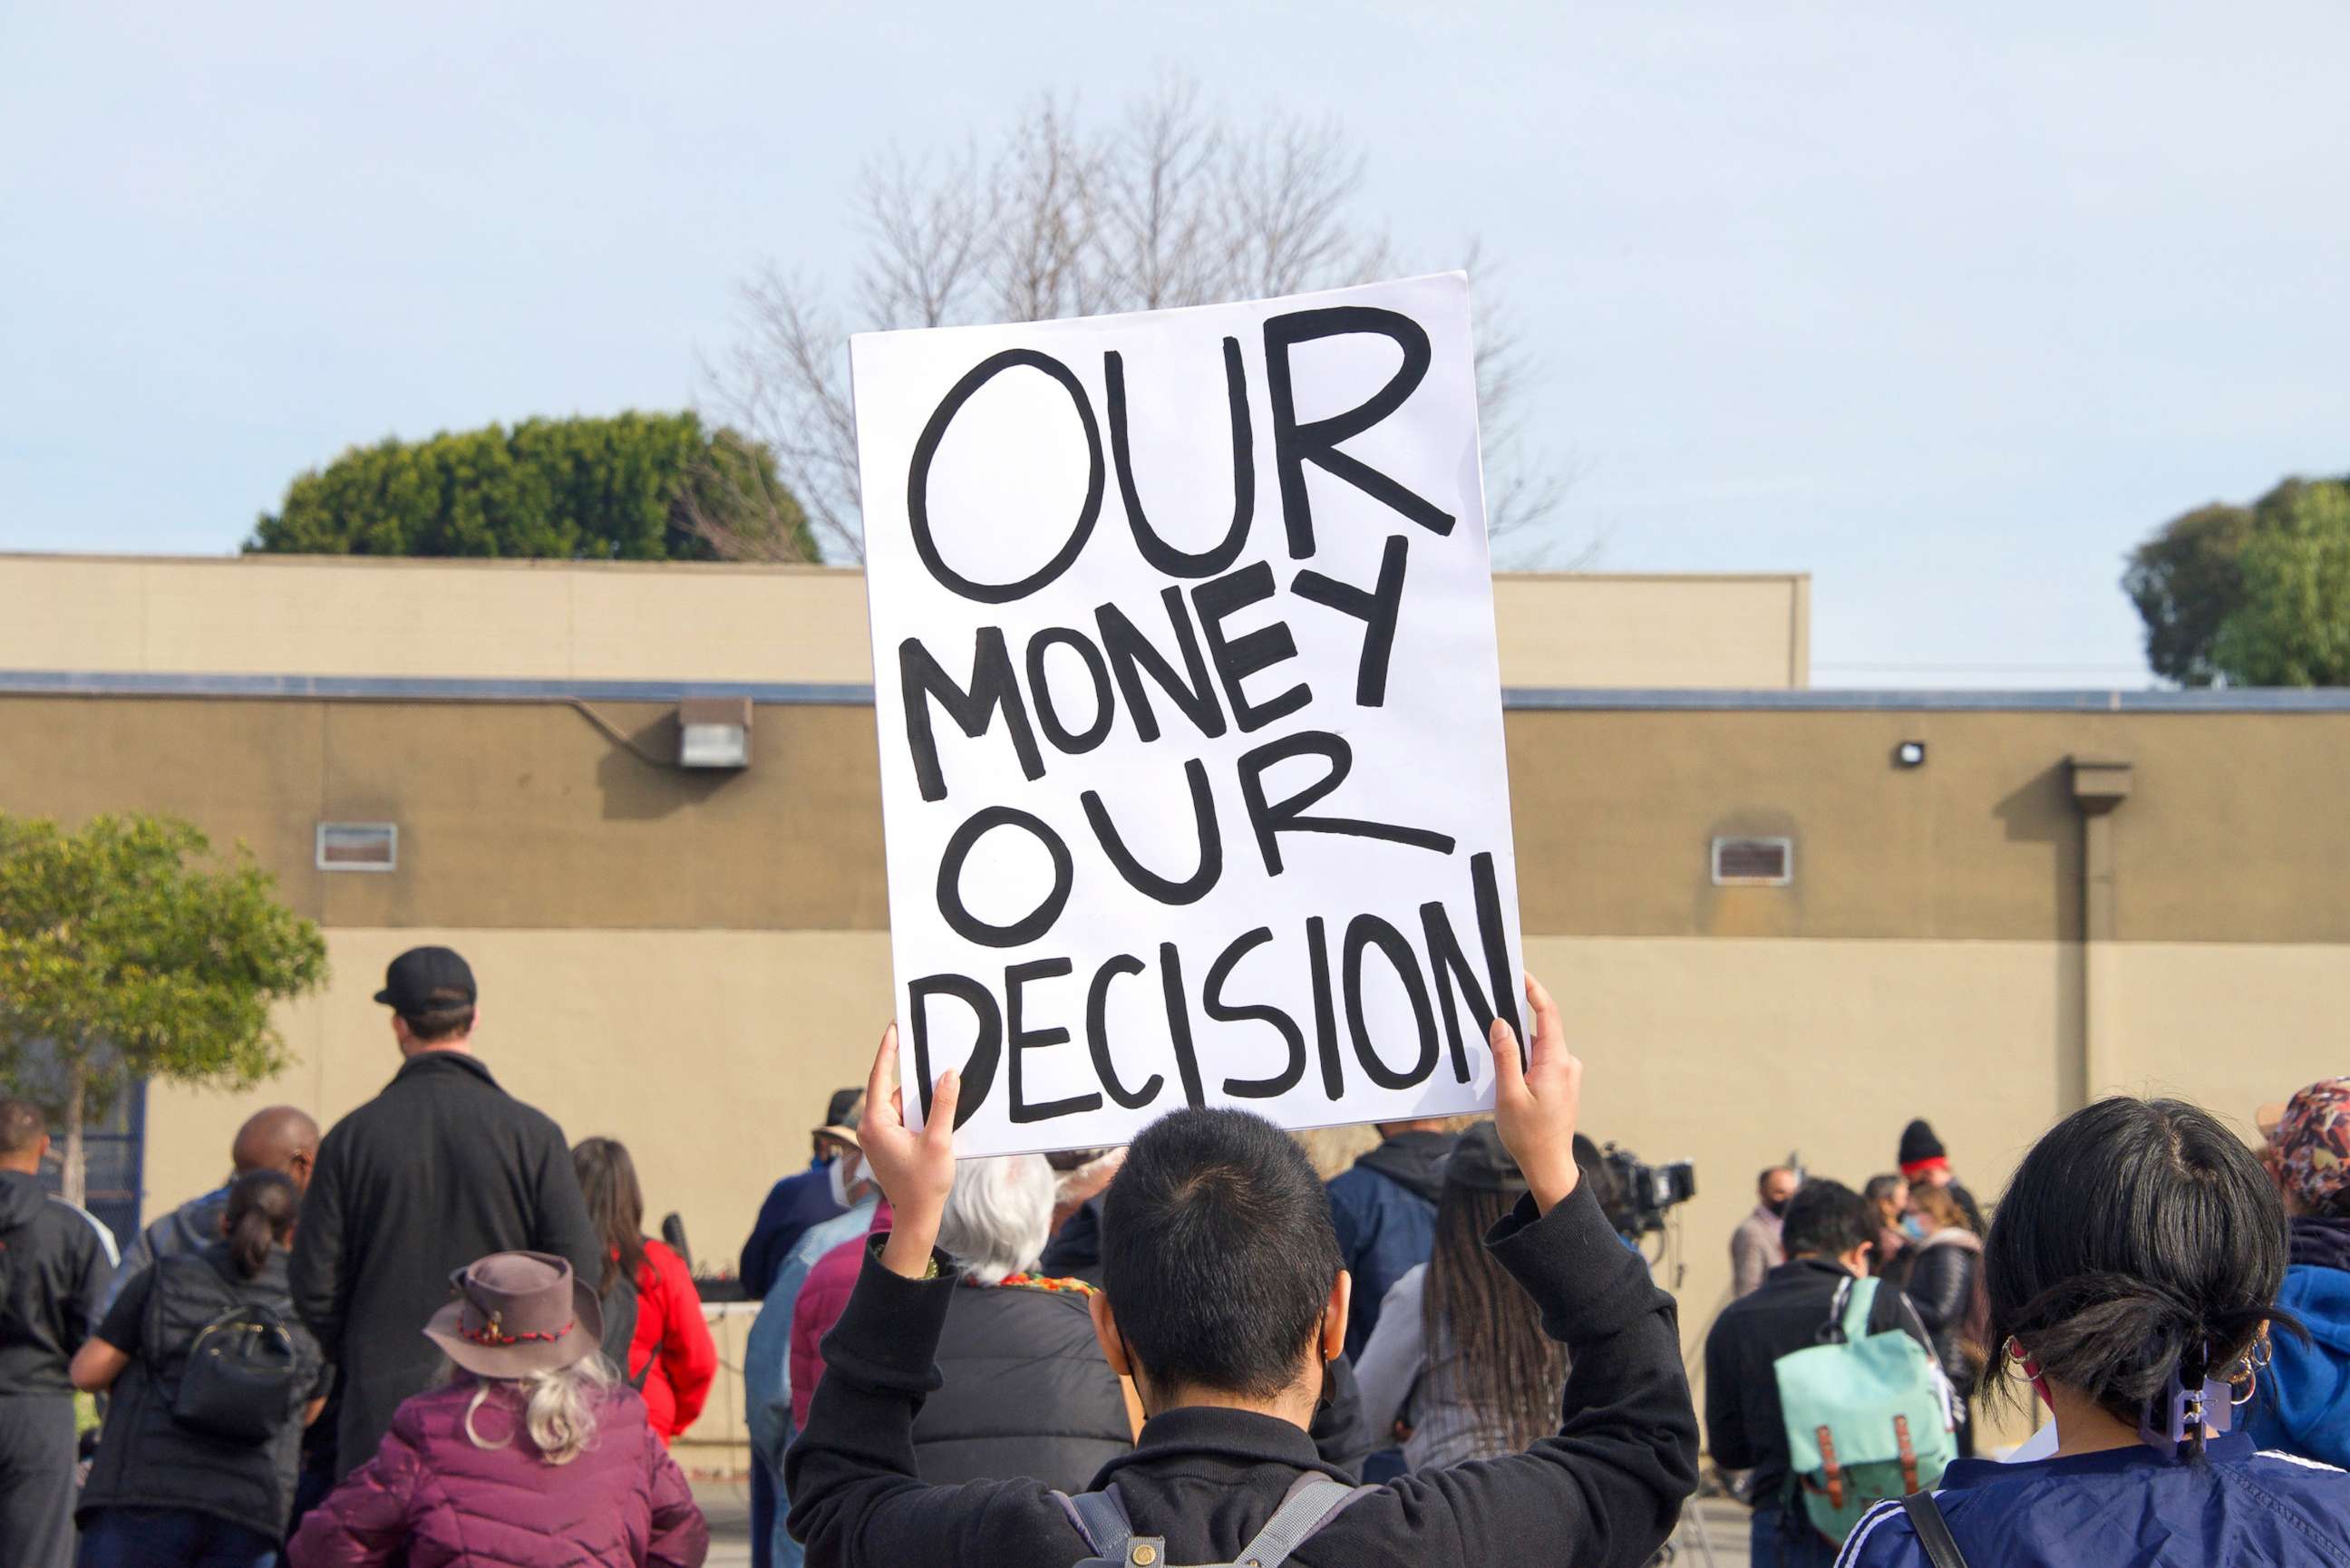 PHOTO: Protesters hold signs protesting planned school closures in the district at Prescott Elementary school in Oakland, Calif., Feb. 5, 2022.